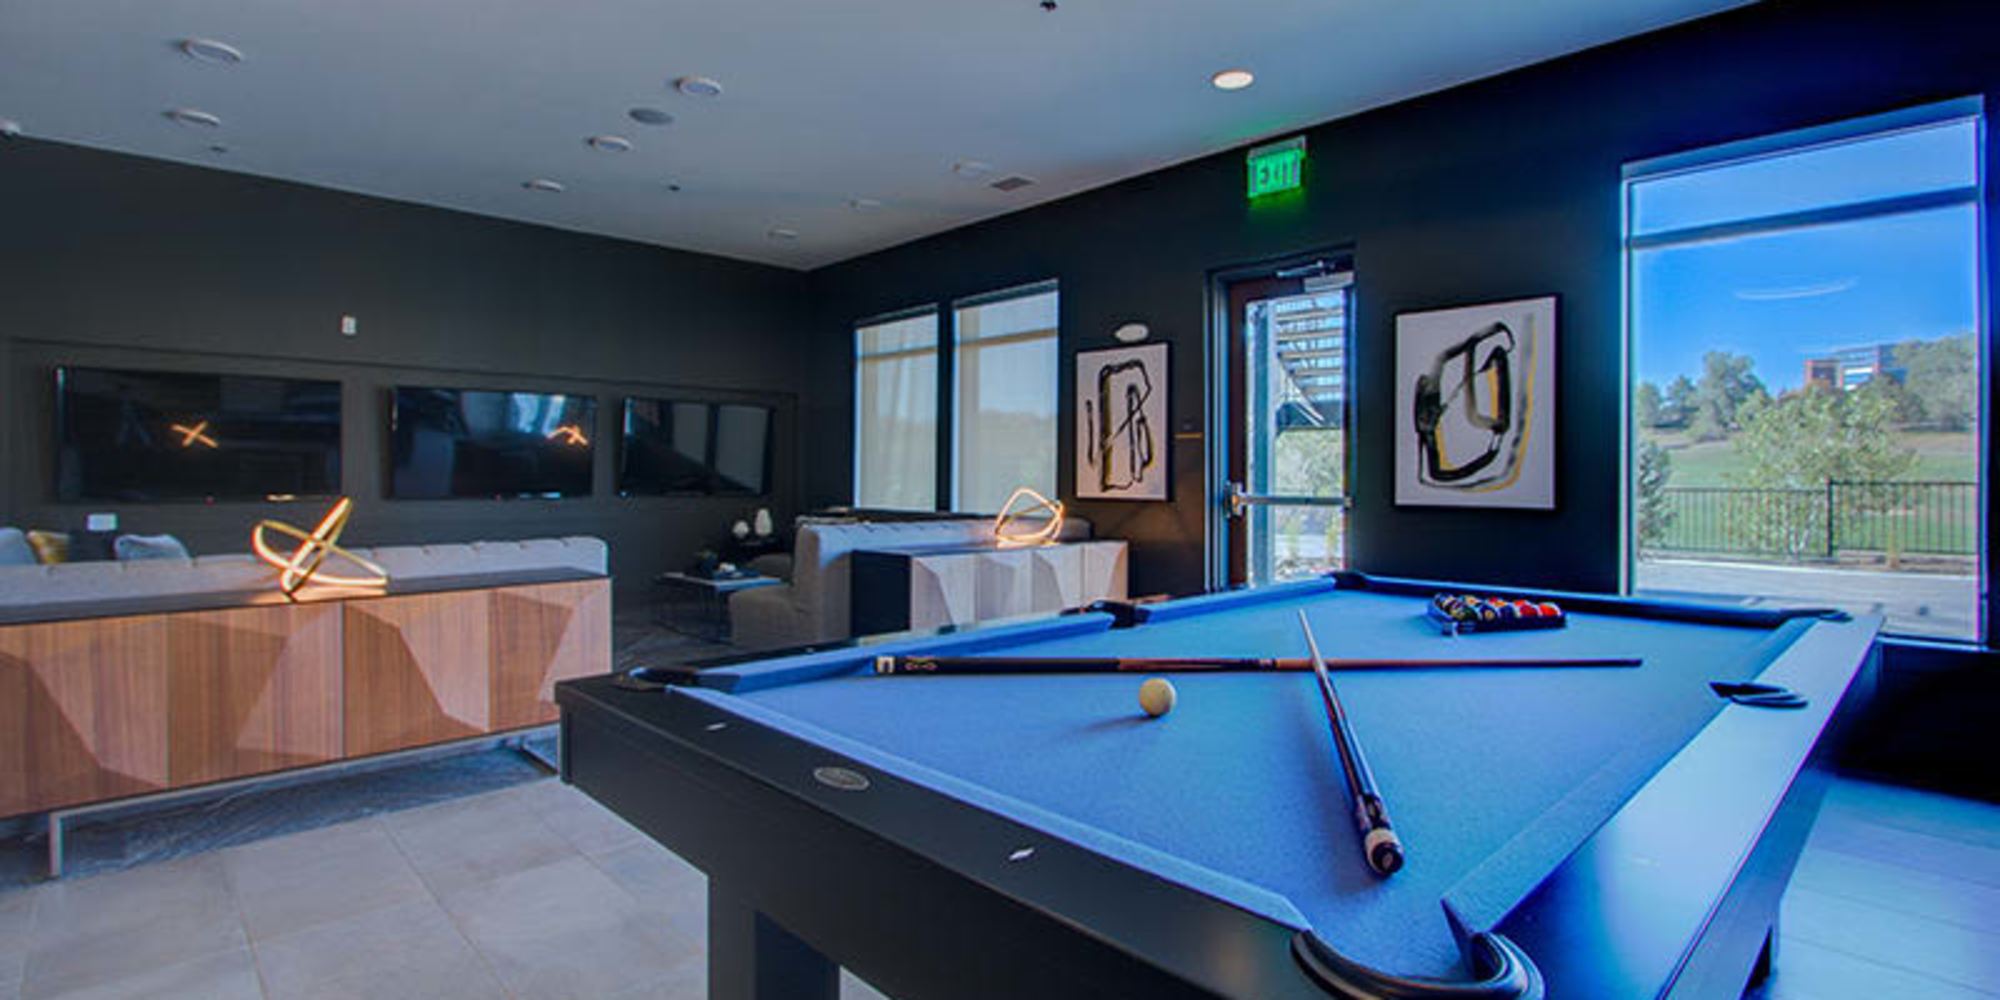 Pool in the game room at Fusion 355 in Broomfield, Colorado